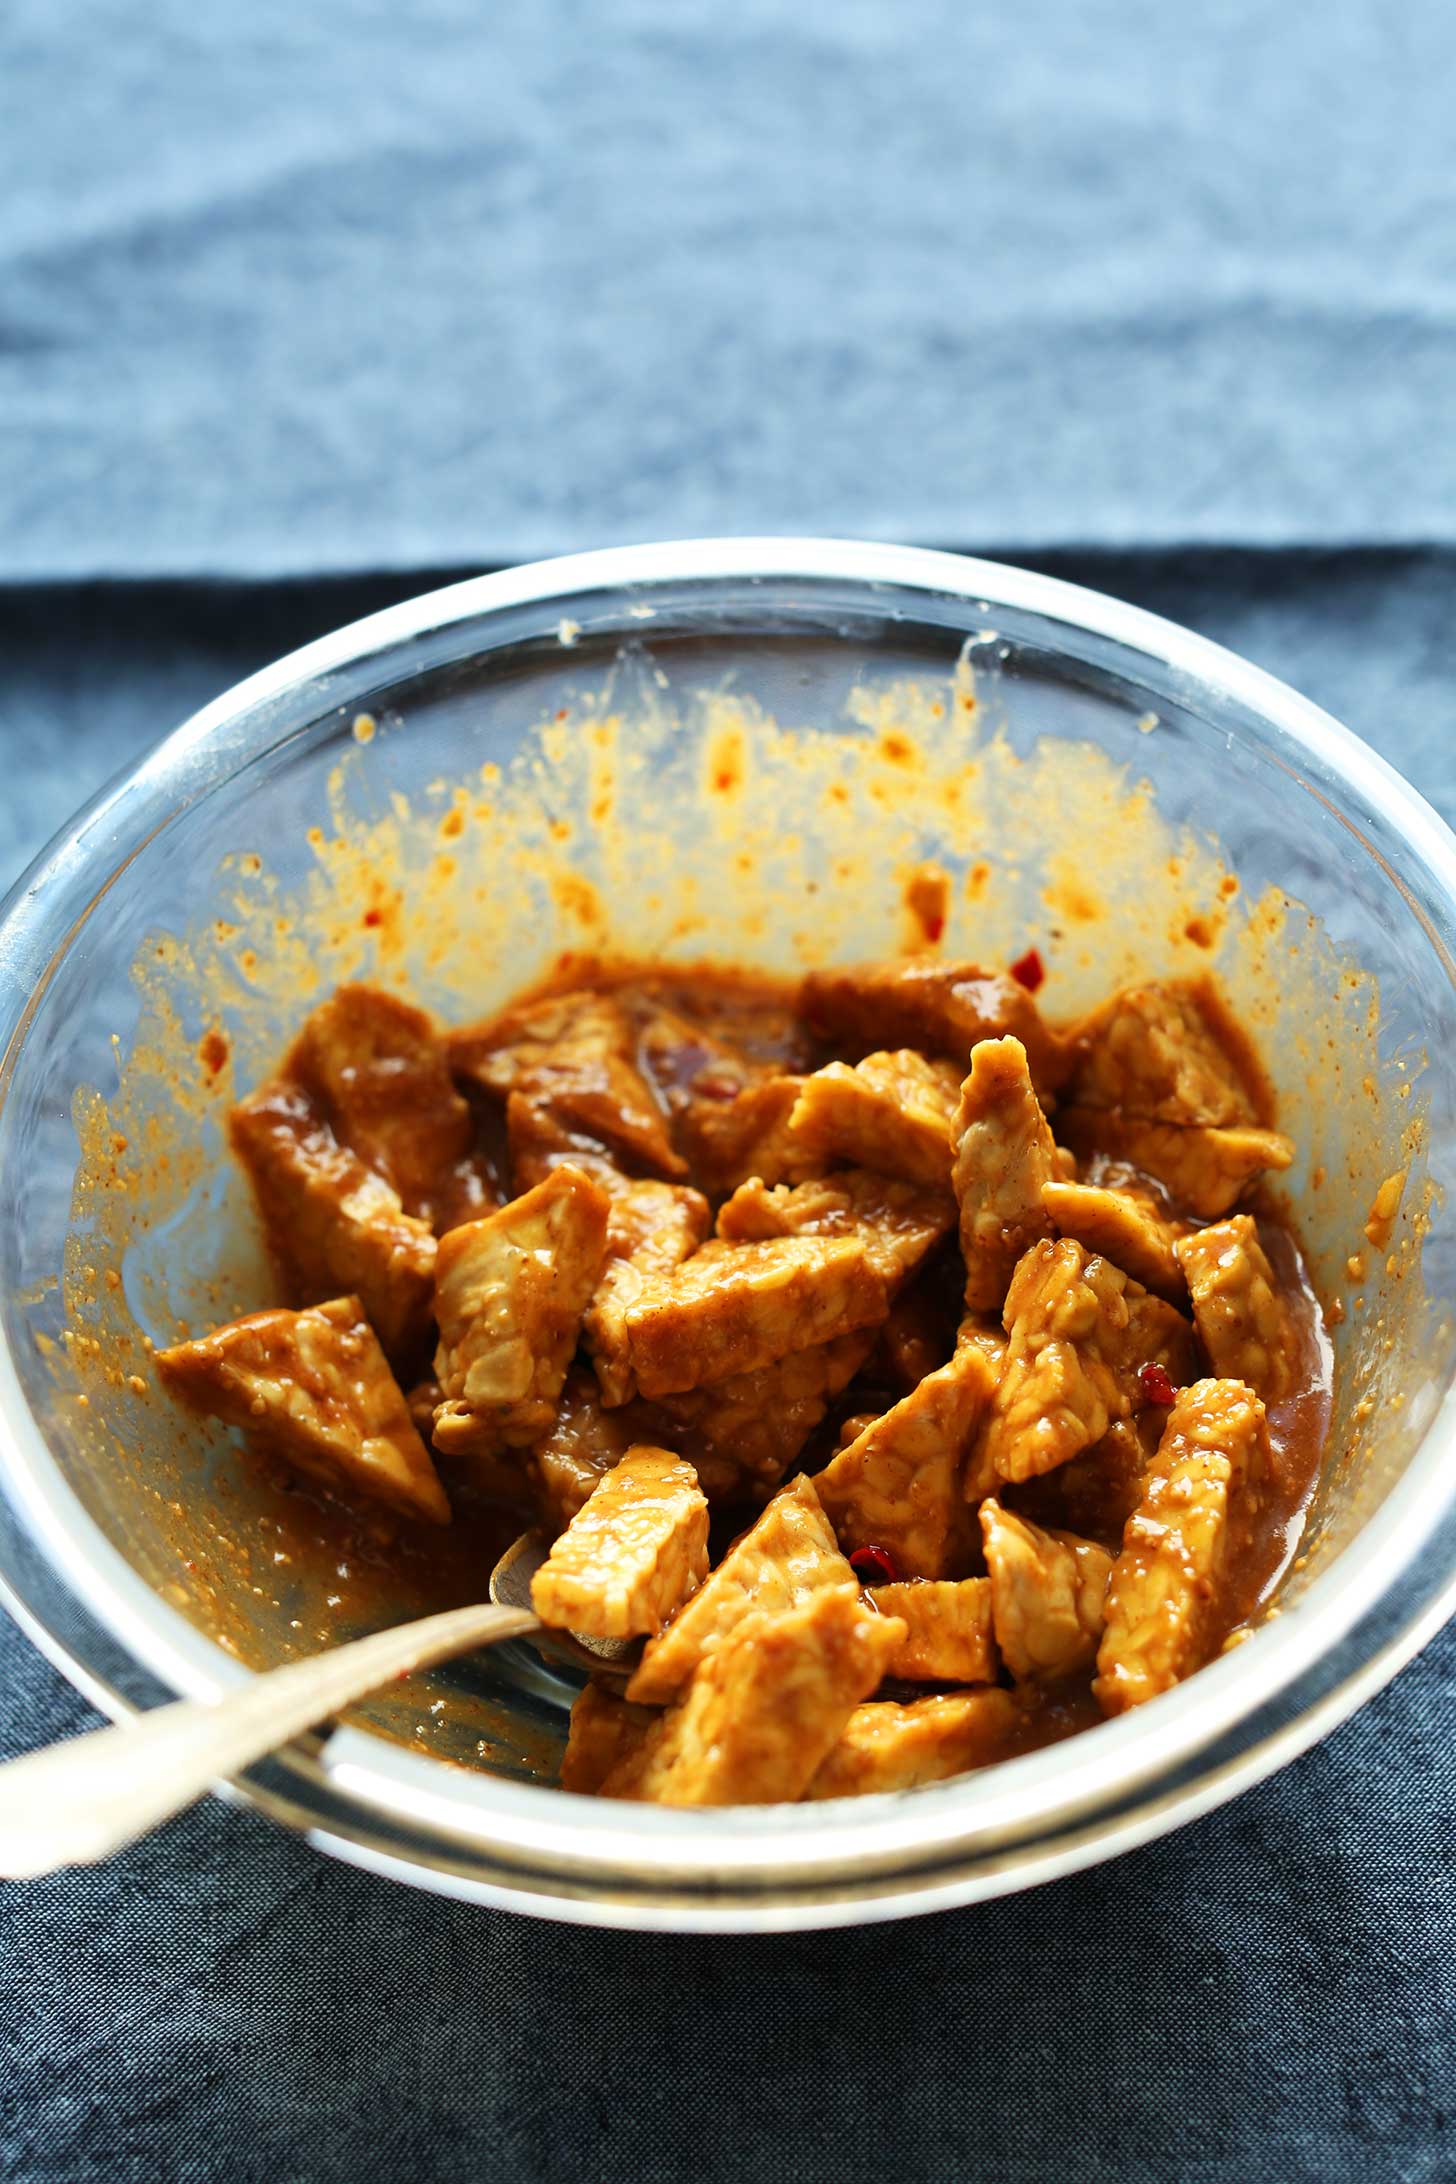 Marinating tempeh in homemade peanut sauce for a protein-packed vegan dish